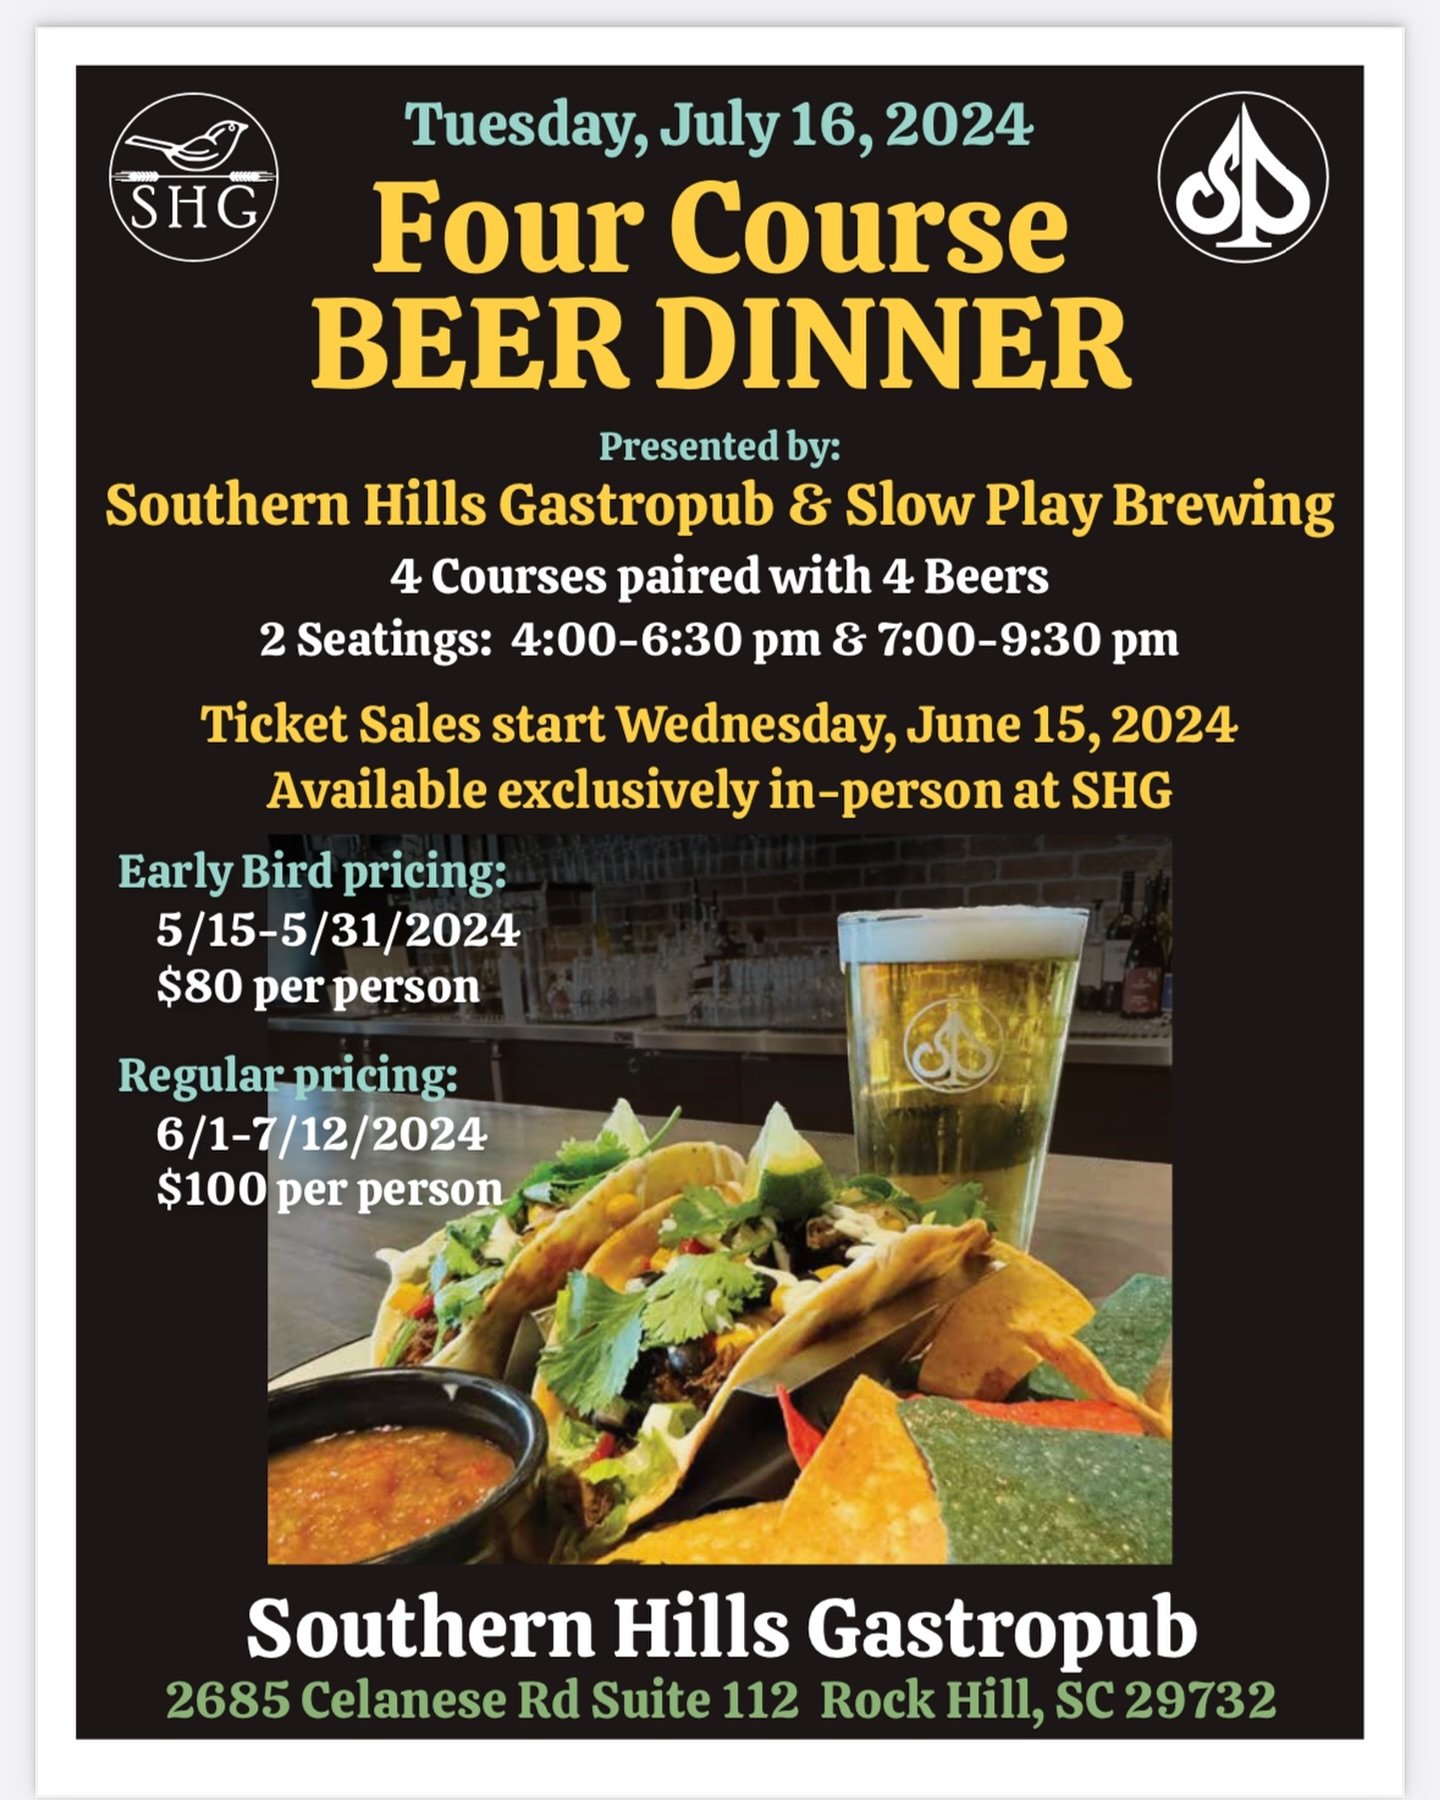 Join us and our friends at @southernhillsgp for a Four Course Beer Dinner on Tuesday, July 16th! Full details below. 👇 

SHG &amp; SP BEER DINNER:
- 4 Courses &amp; 4 Beer Pours
- 2 seatings at 4-6:30pm and 7-9:30pm
- Tickets MUST be purchased IN AD